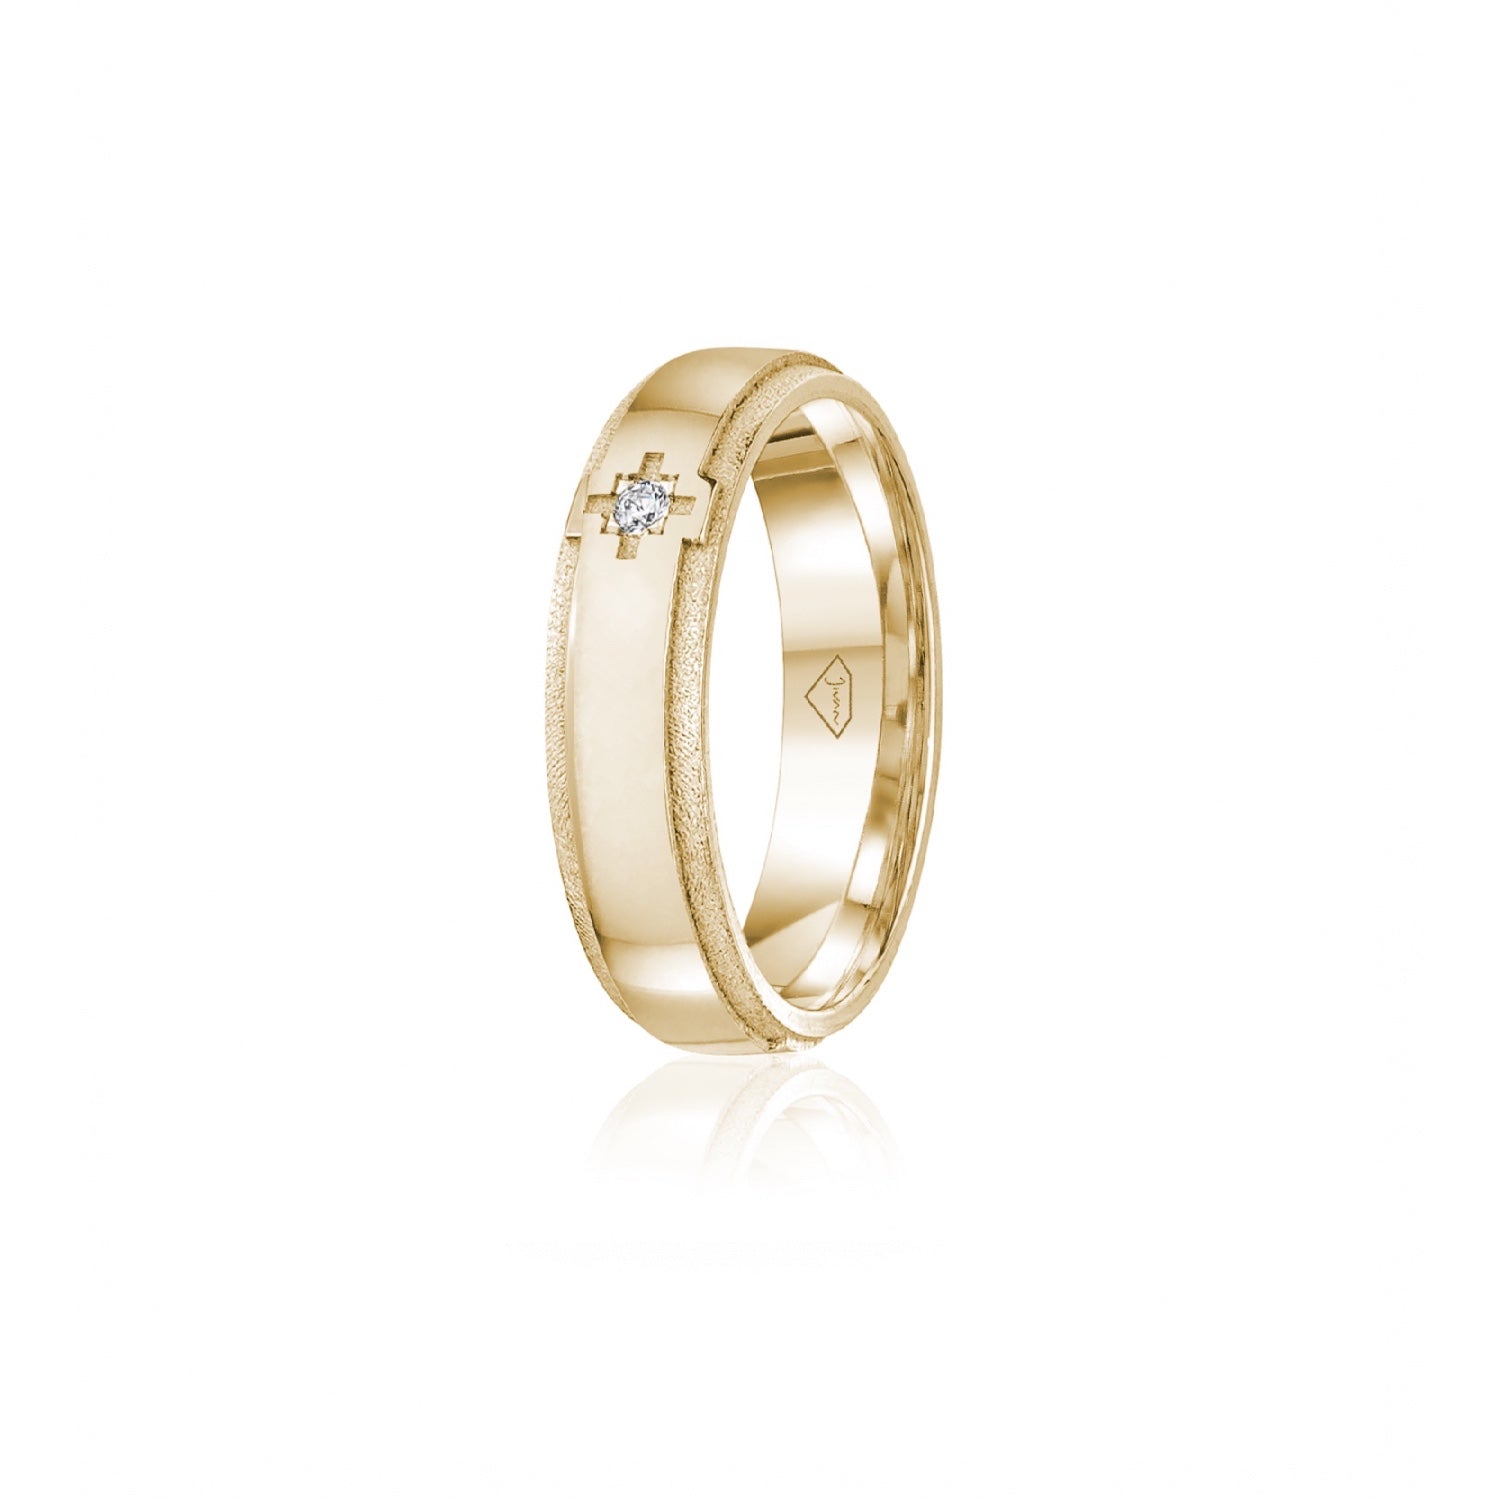 Diamond Accent Polished Finish Bevelled Edge 6-7 mm Wedding Ring in Yellow Gold